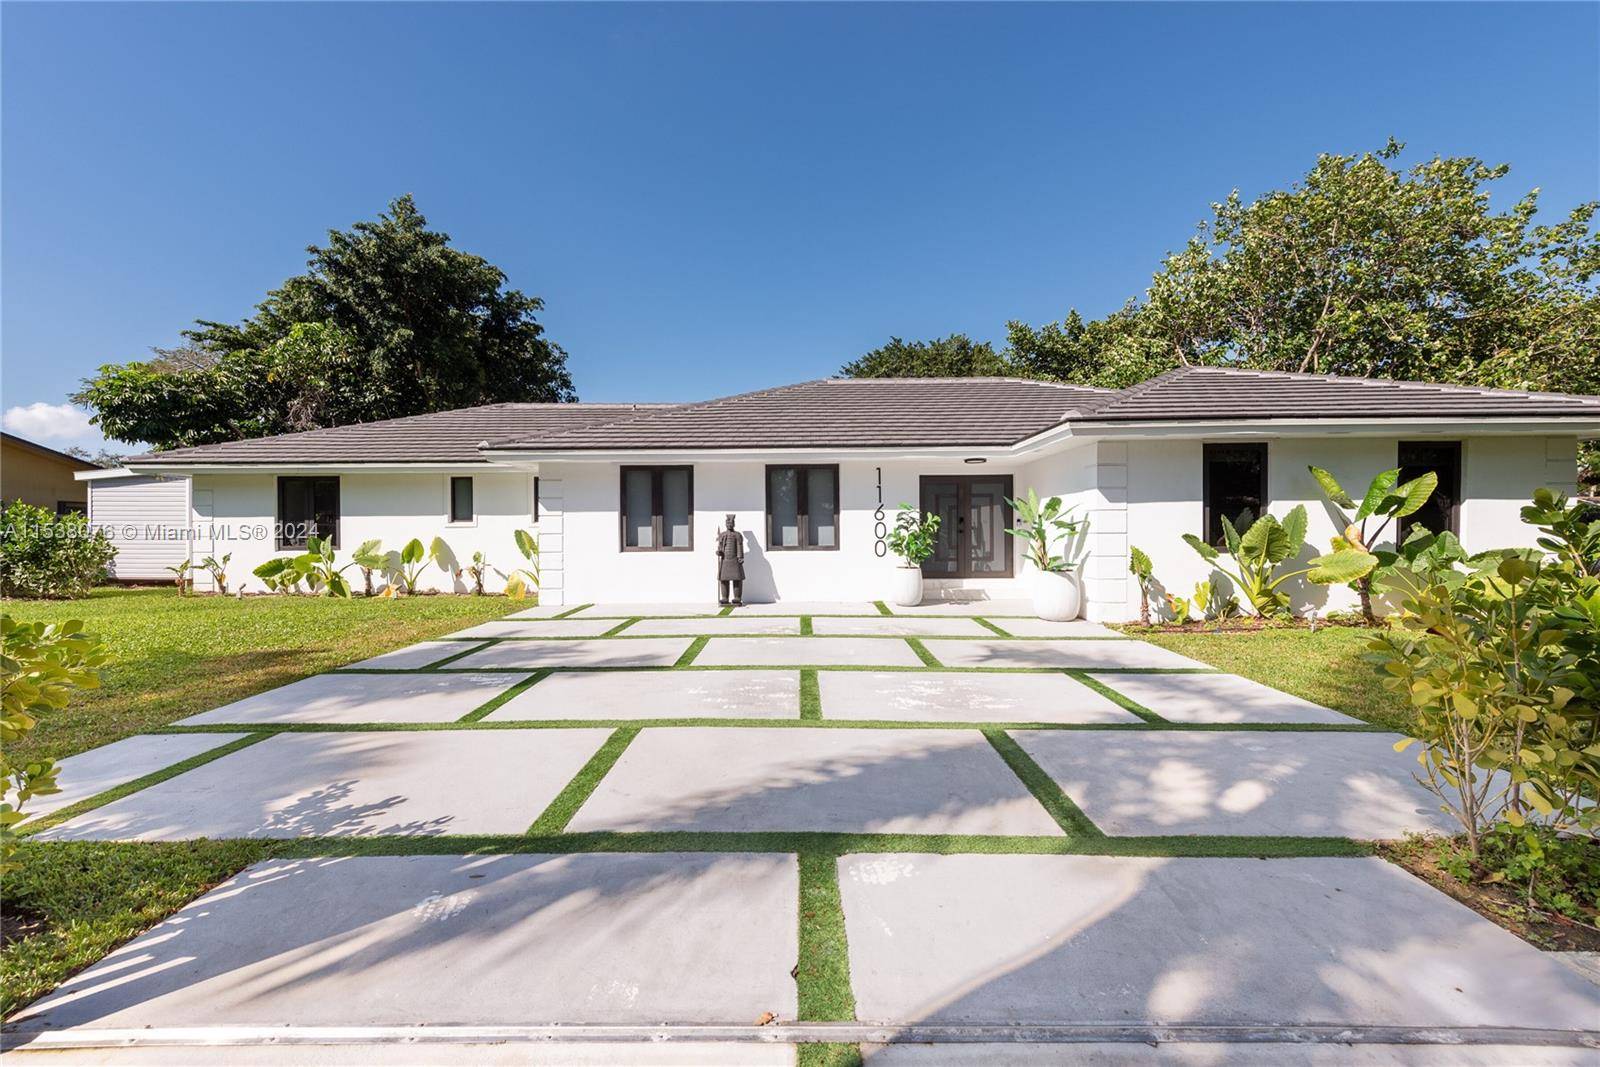 Completely renovated with natural light, canal front house in the gem of Pinecrest.